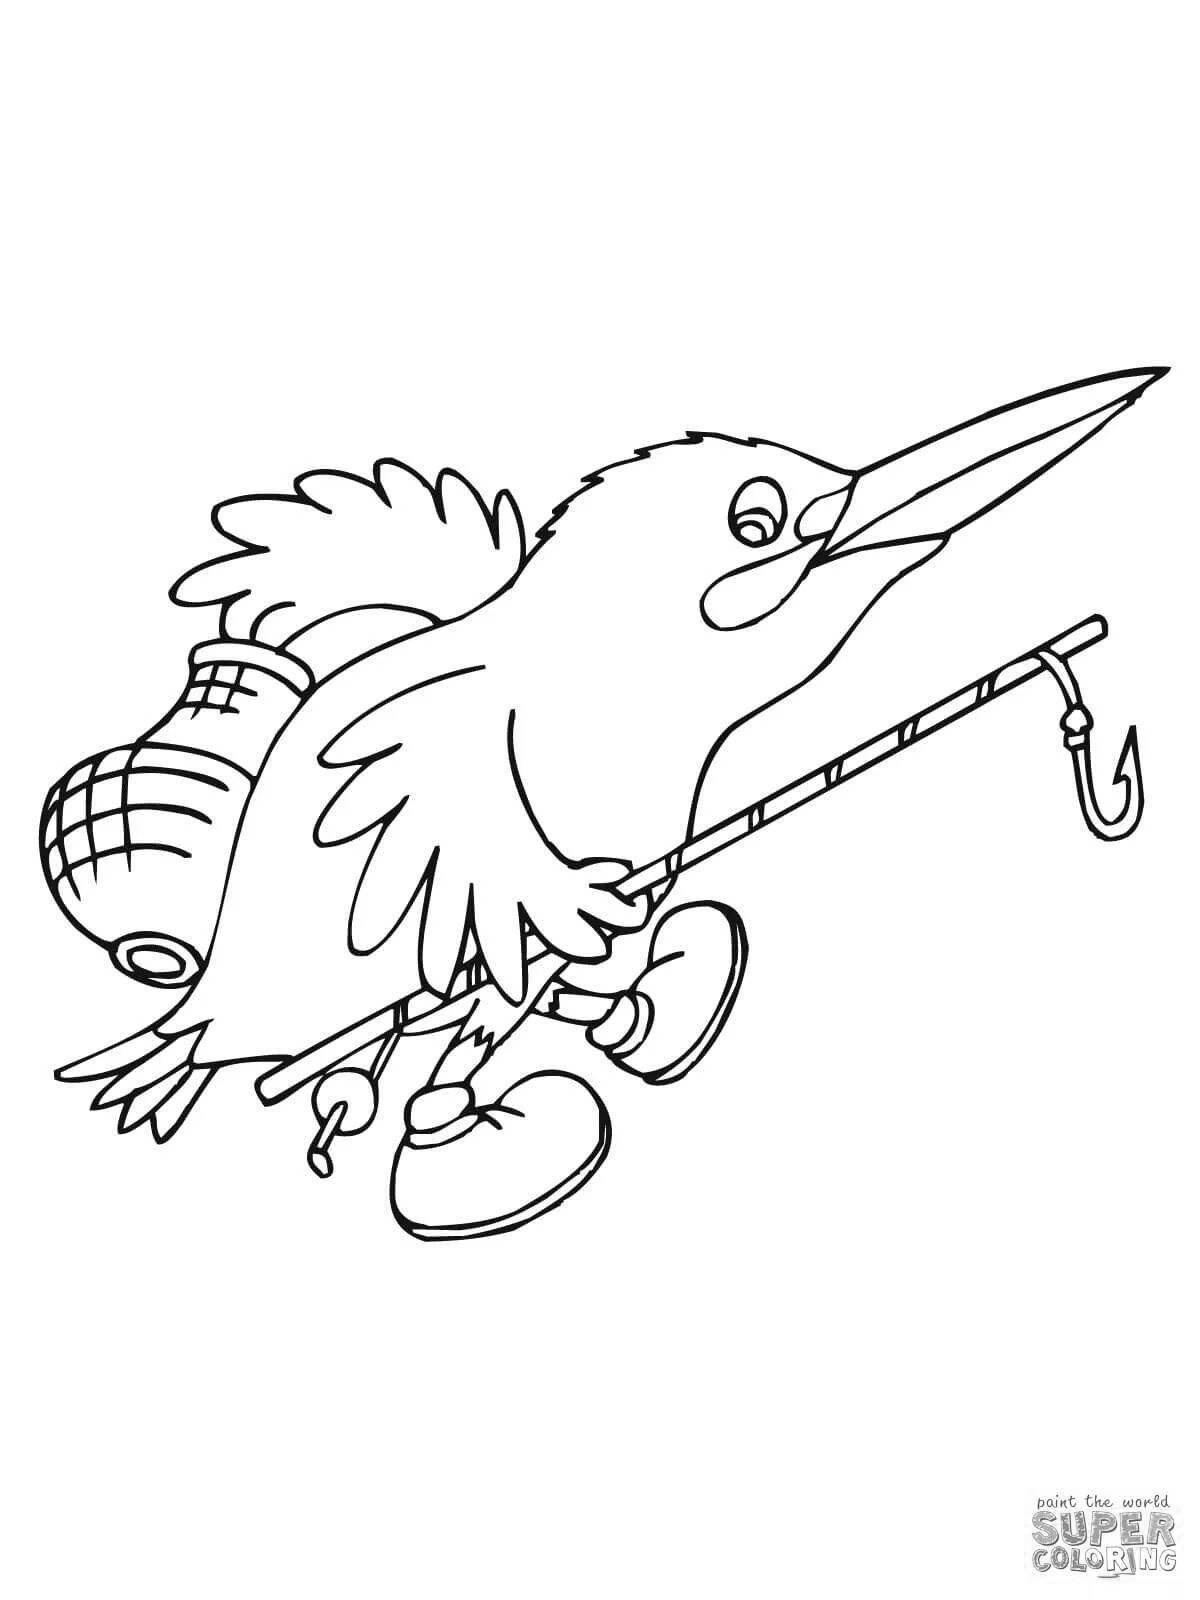 A strikingly beautiful kingfisher coloring page